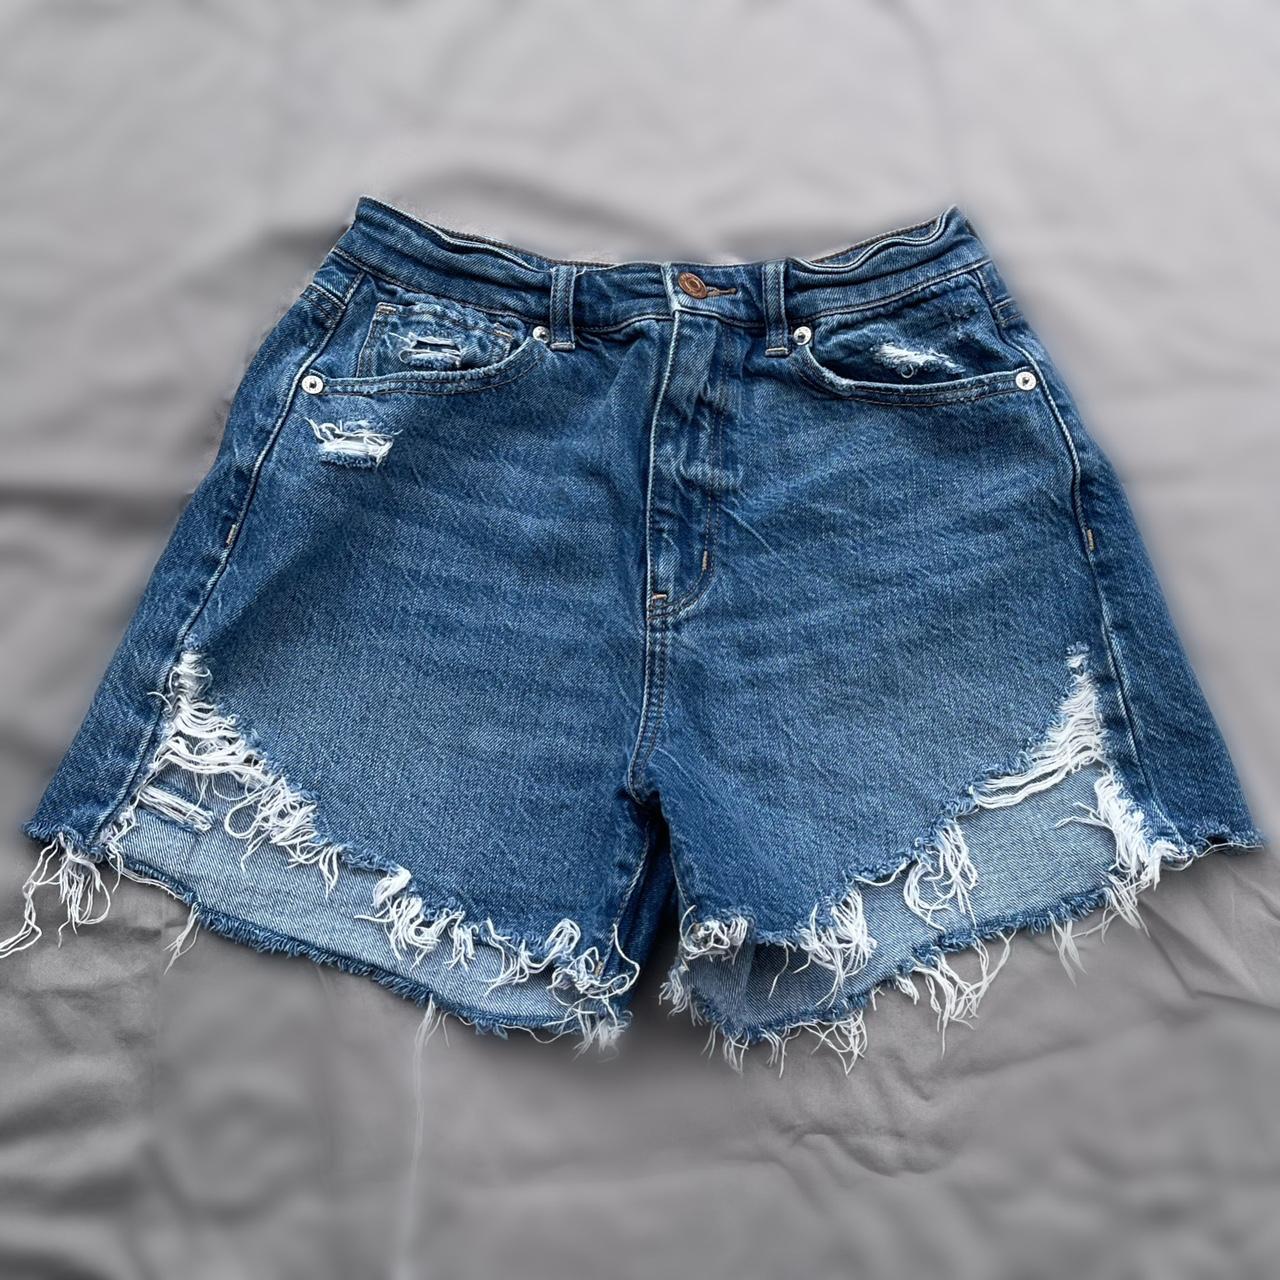 American Eagle Outfitters Women's Blue Shorts | Depop